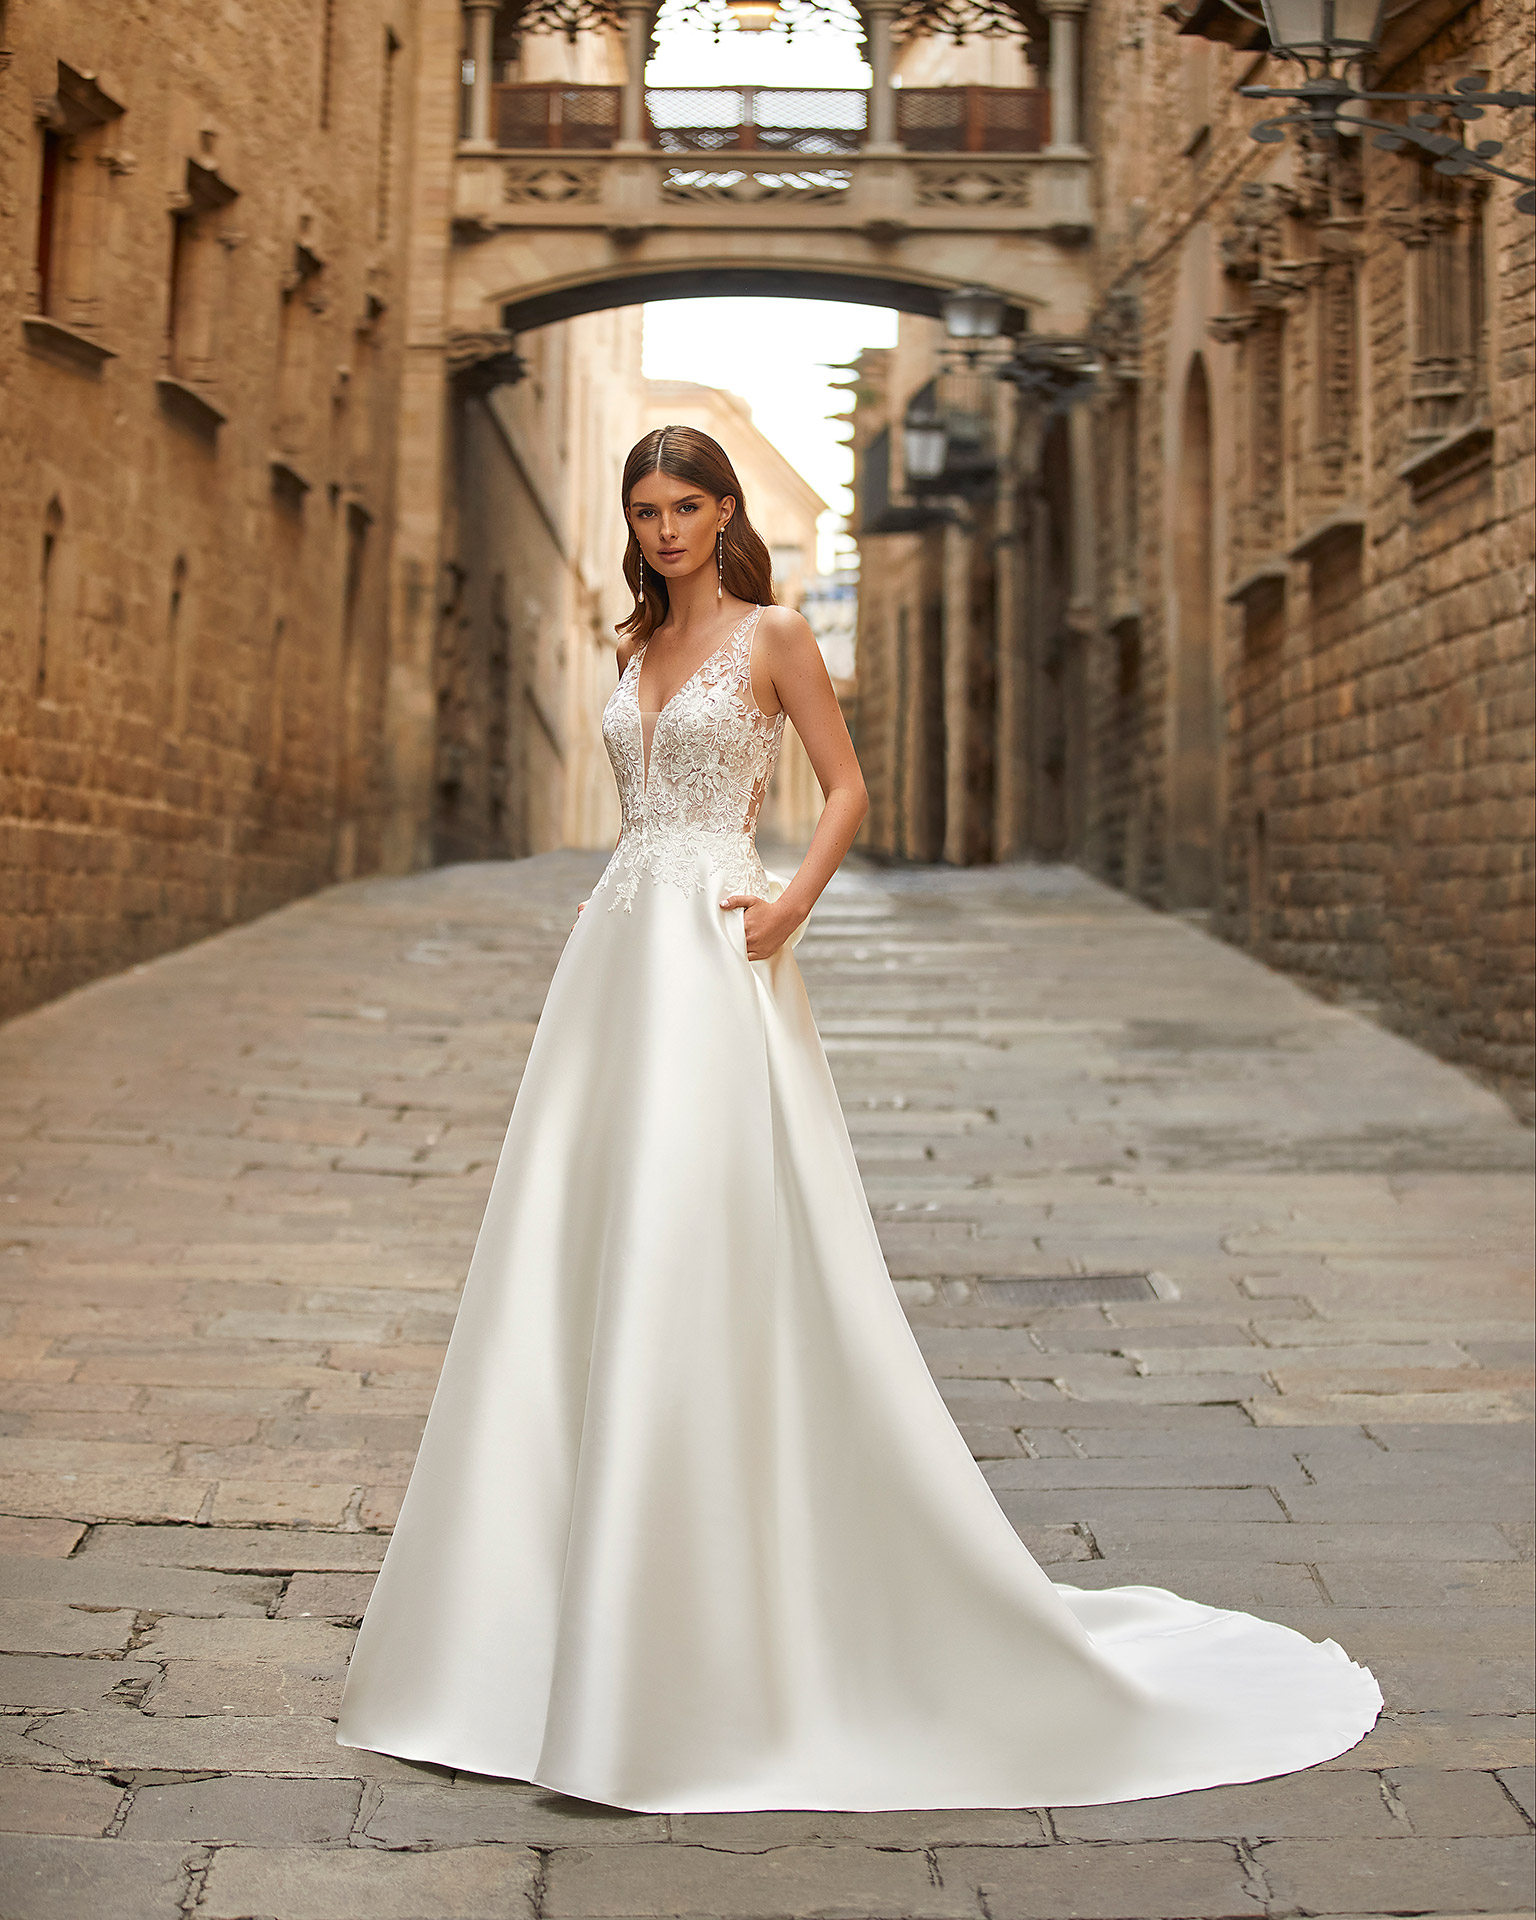 Elegant A-line wedding dress, made of matt Mikado, with a sheath-style skirt with pockets; with a deep-plunge neckline with delicate beadwork detail, and an illusion lace button-up back. Delicate Luna Novias look made of matt Mikado combined with lace. LUNA_NOVIAS.